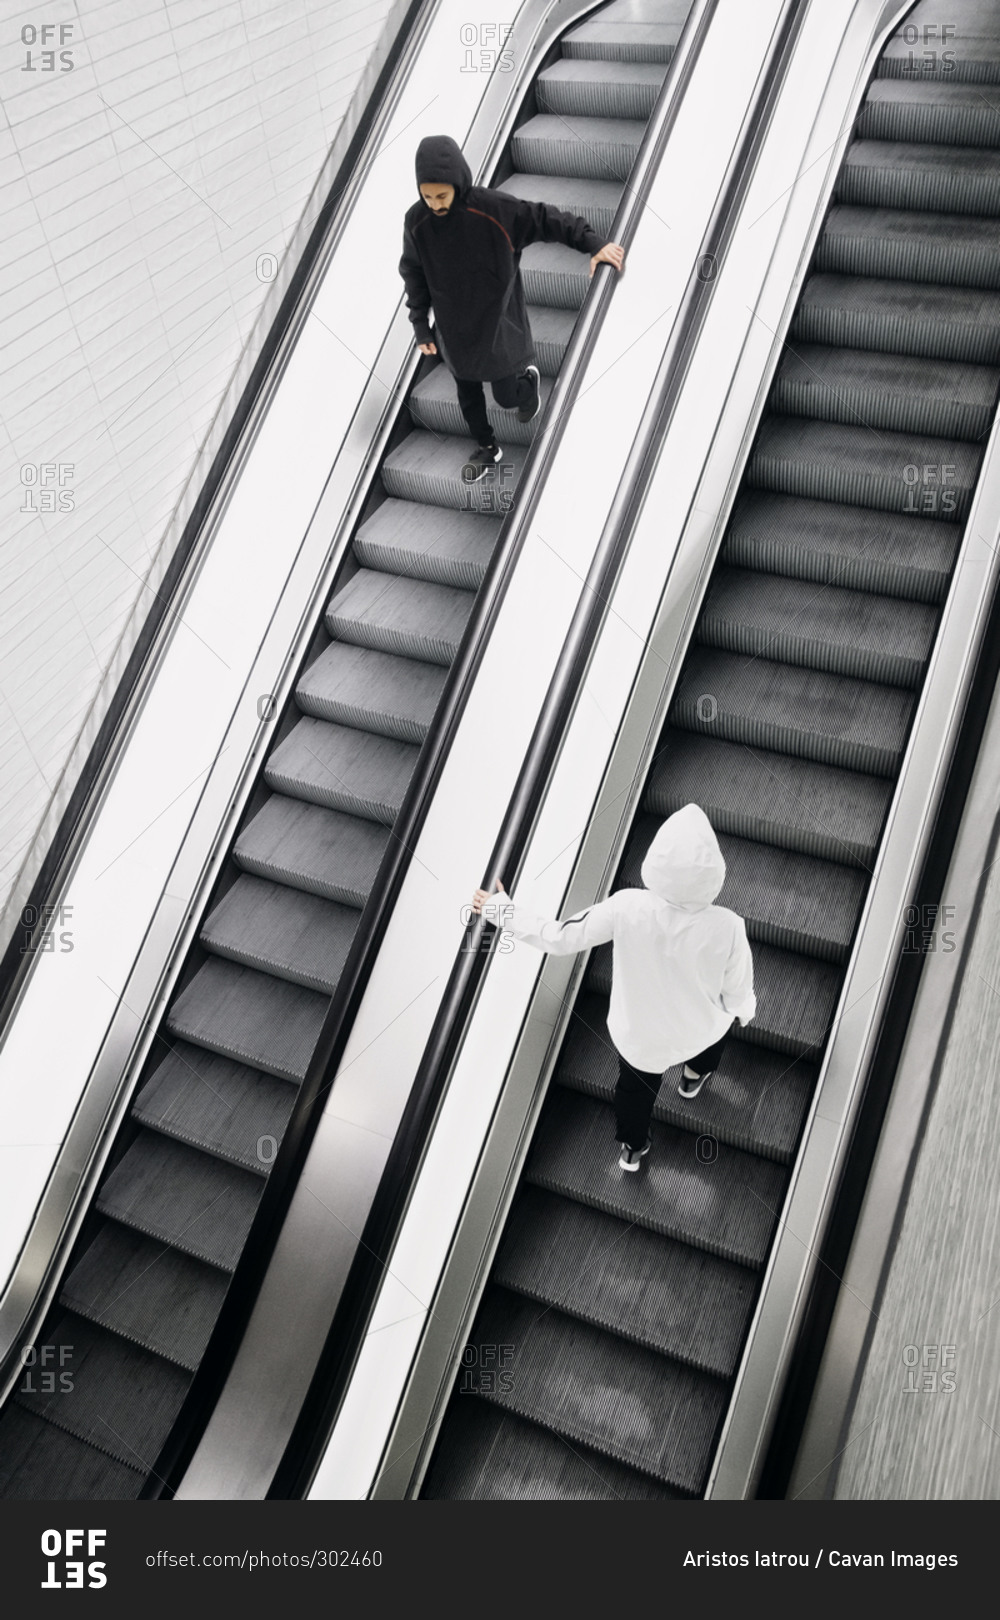 Two people going up and down an escalator